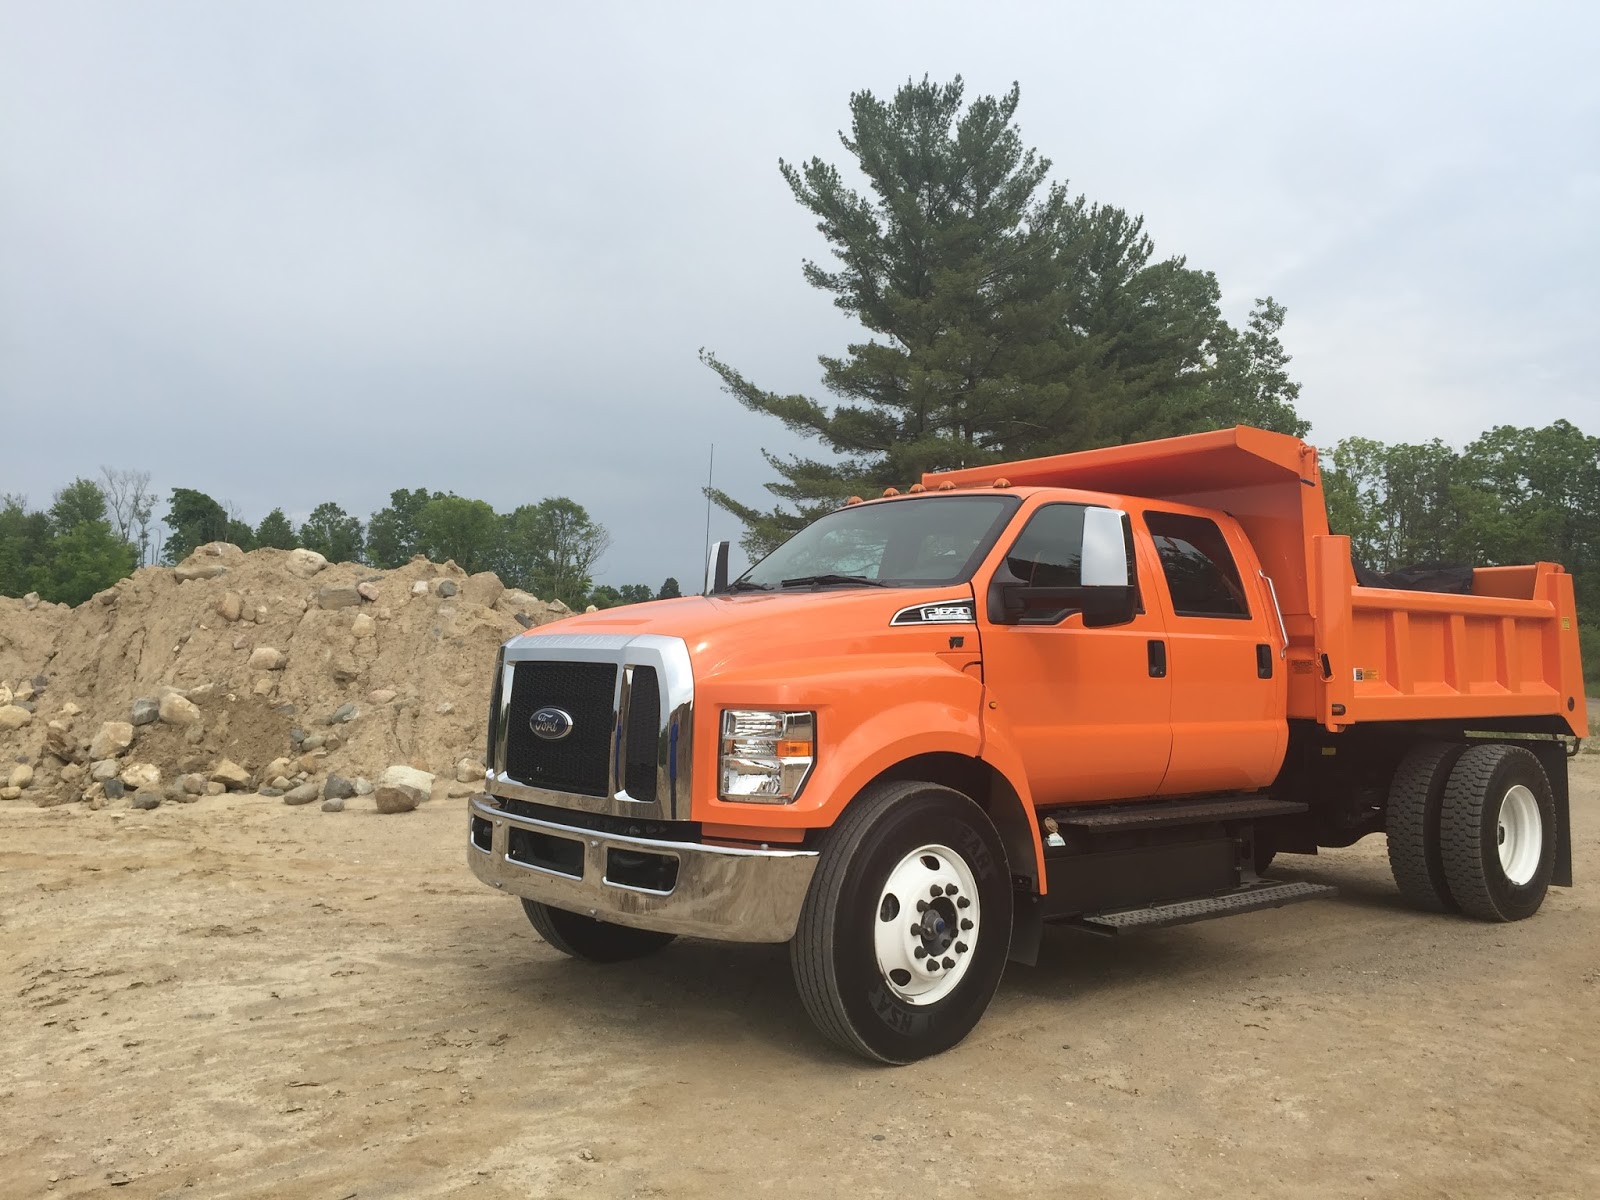 Hansel Ford Commercial Trucks And Fleet Test Drive Fords F 650 Super